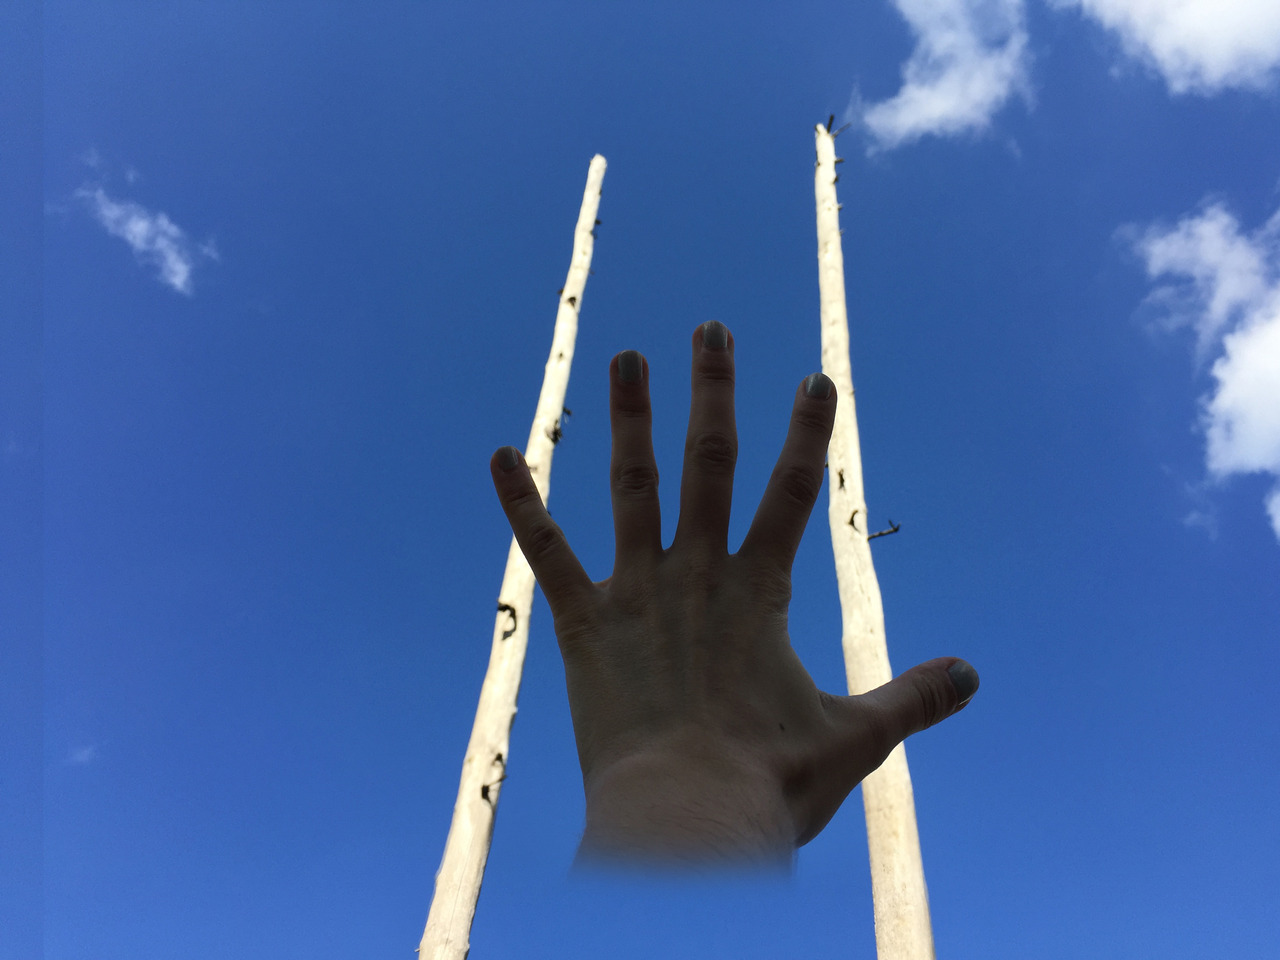 Photo of two large, bare, white tree trunks with no branches or leaves against blue sky, and my hand with no wrist or arm connected to it hovering in front of them